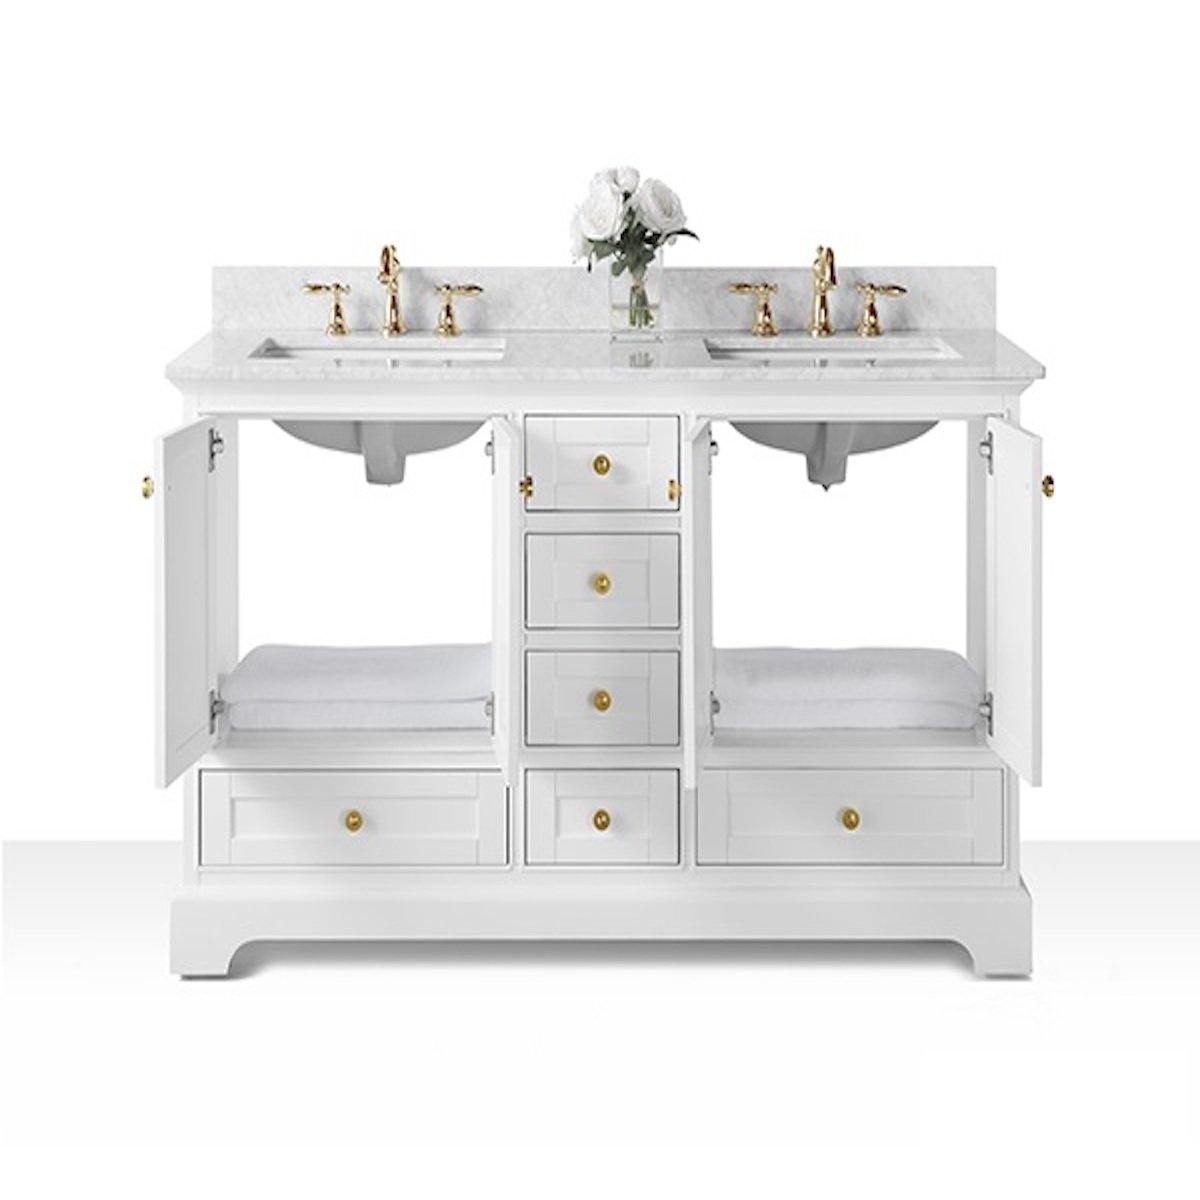 Ancerre Designs Audrey 60 Inch White Double Vanity Inside